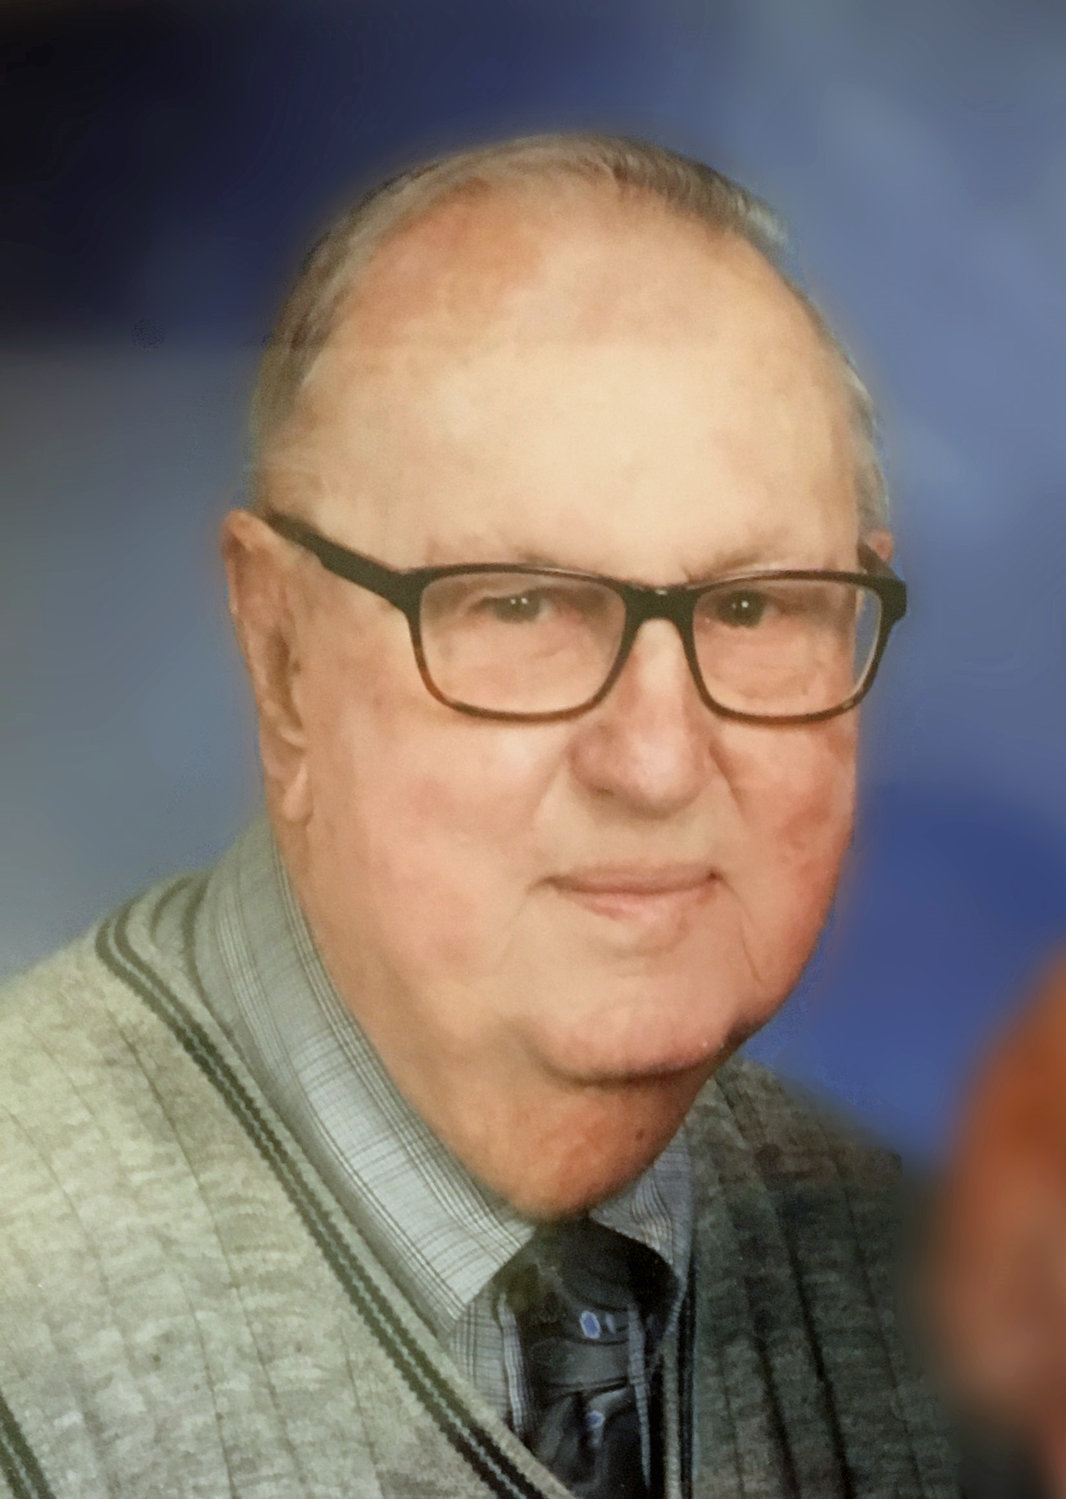 Orville Virden Hess passed away June 6 at the age of 91. Orville was a loving husband, father and grandfather and a veteran of the U.S. Army and U.S. Army Reserves.